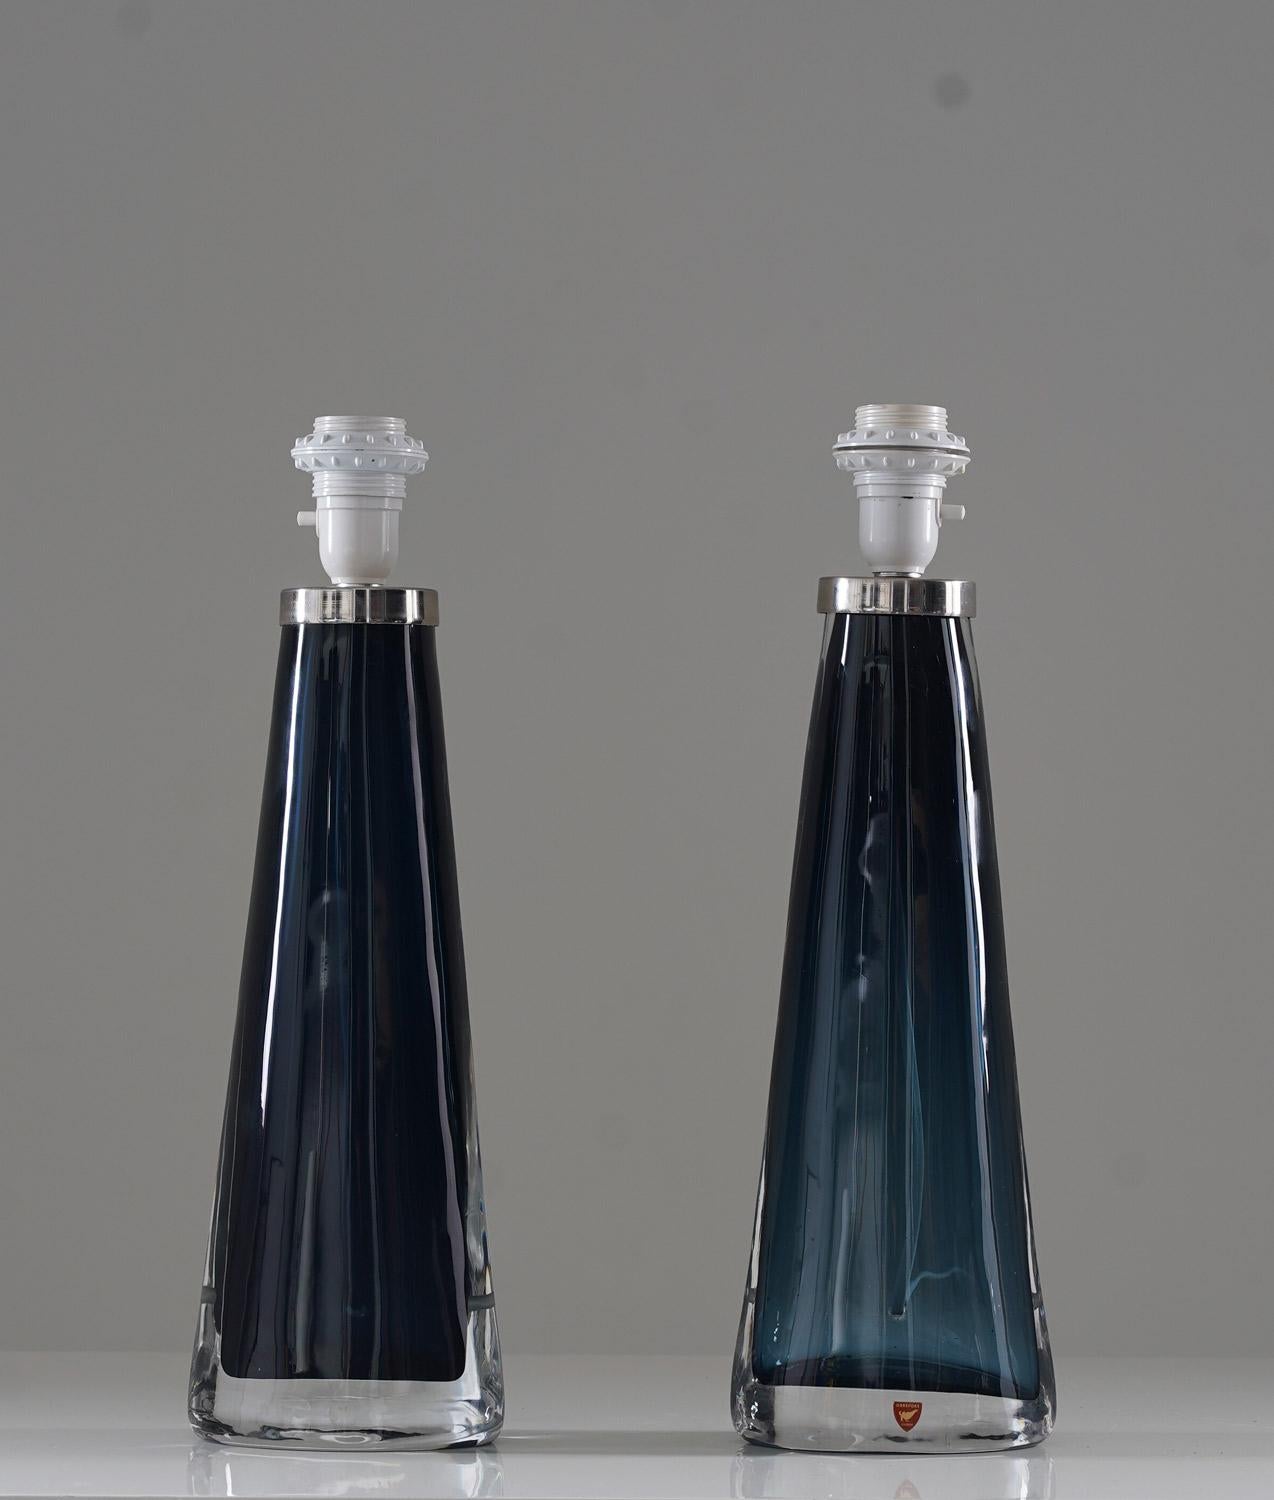 A pair of table lamps in crystal, by Carl Fagerlund for Orrefors, Sweden. 
The lamps are oval-shaped with stunning deep-blue color.
Condition: Very good original condition. The transparency of the glass differs a bit.
Height including socket: 44